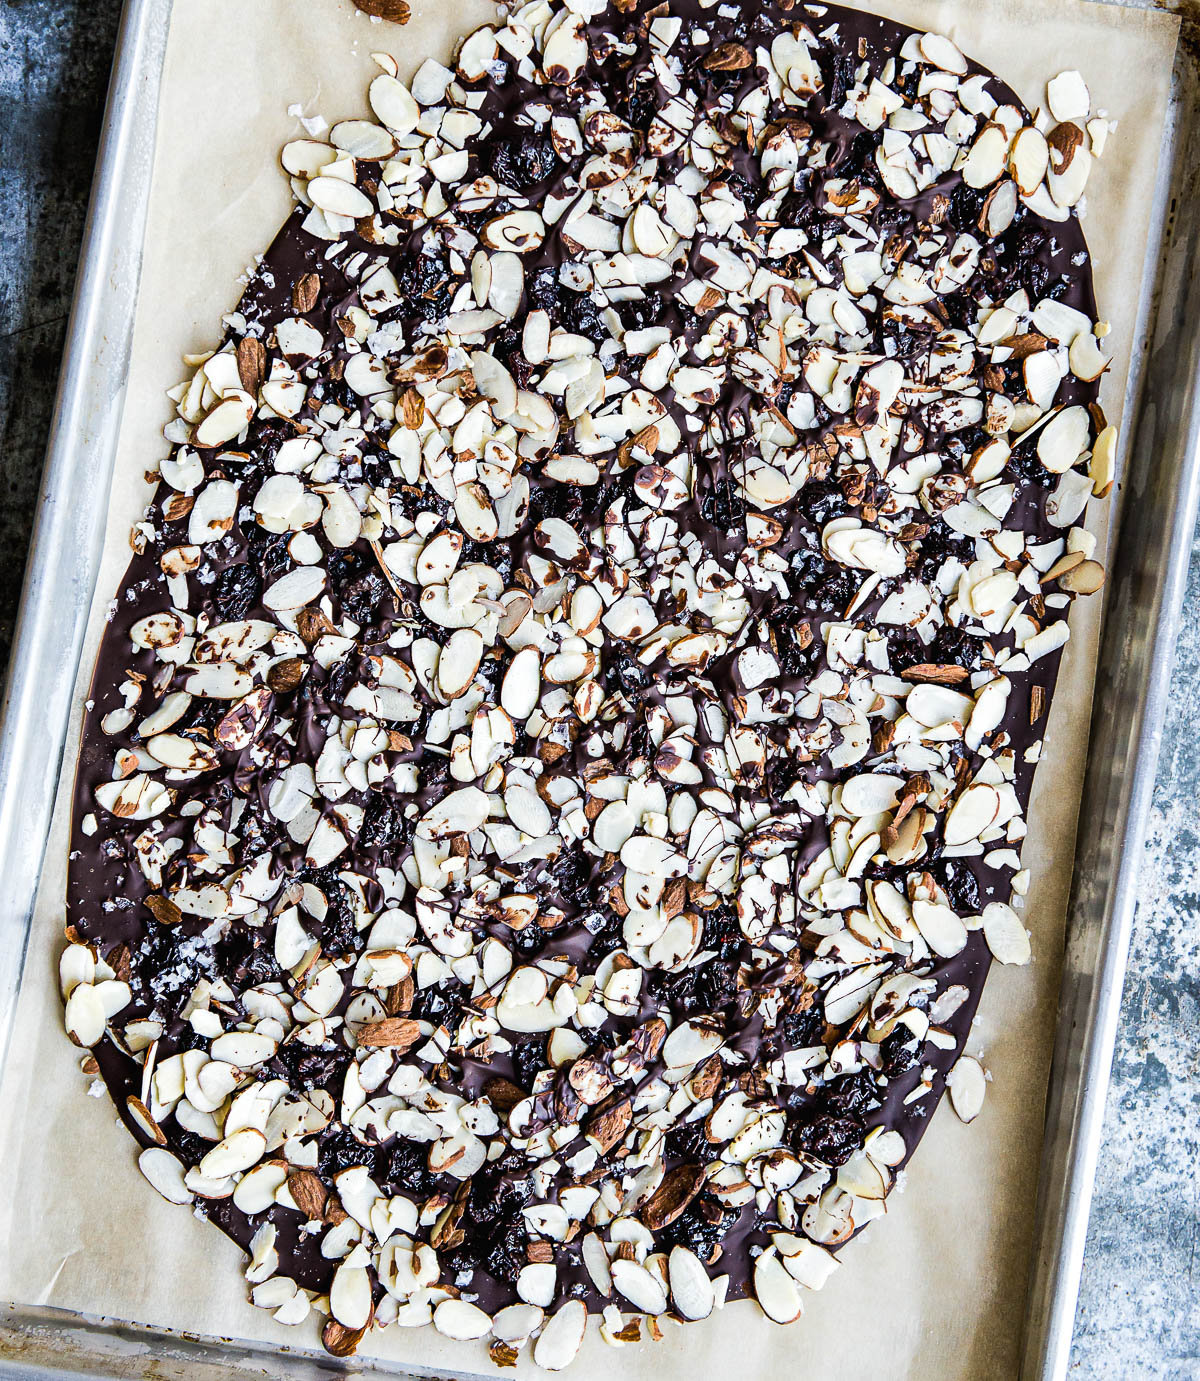 melted chocolate spread out on a parchment lined baking sheet, topped with sliced almonds.